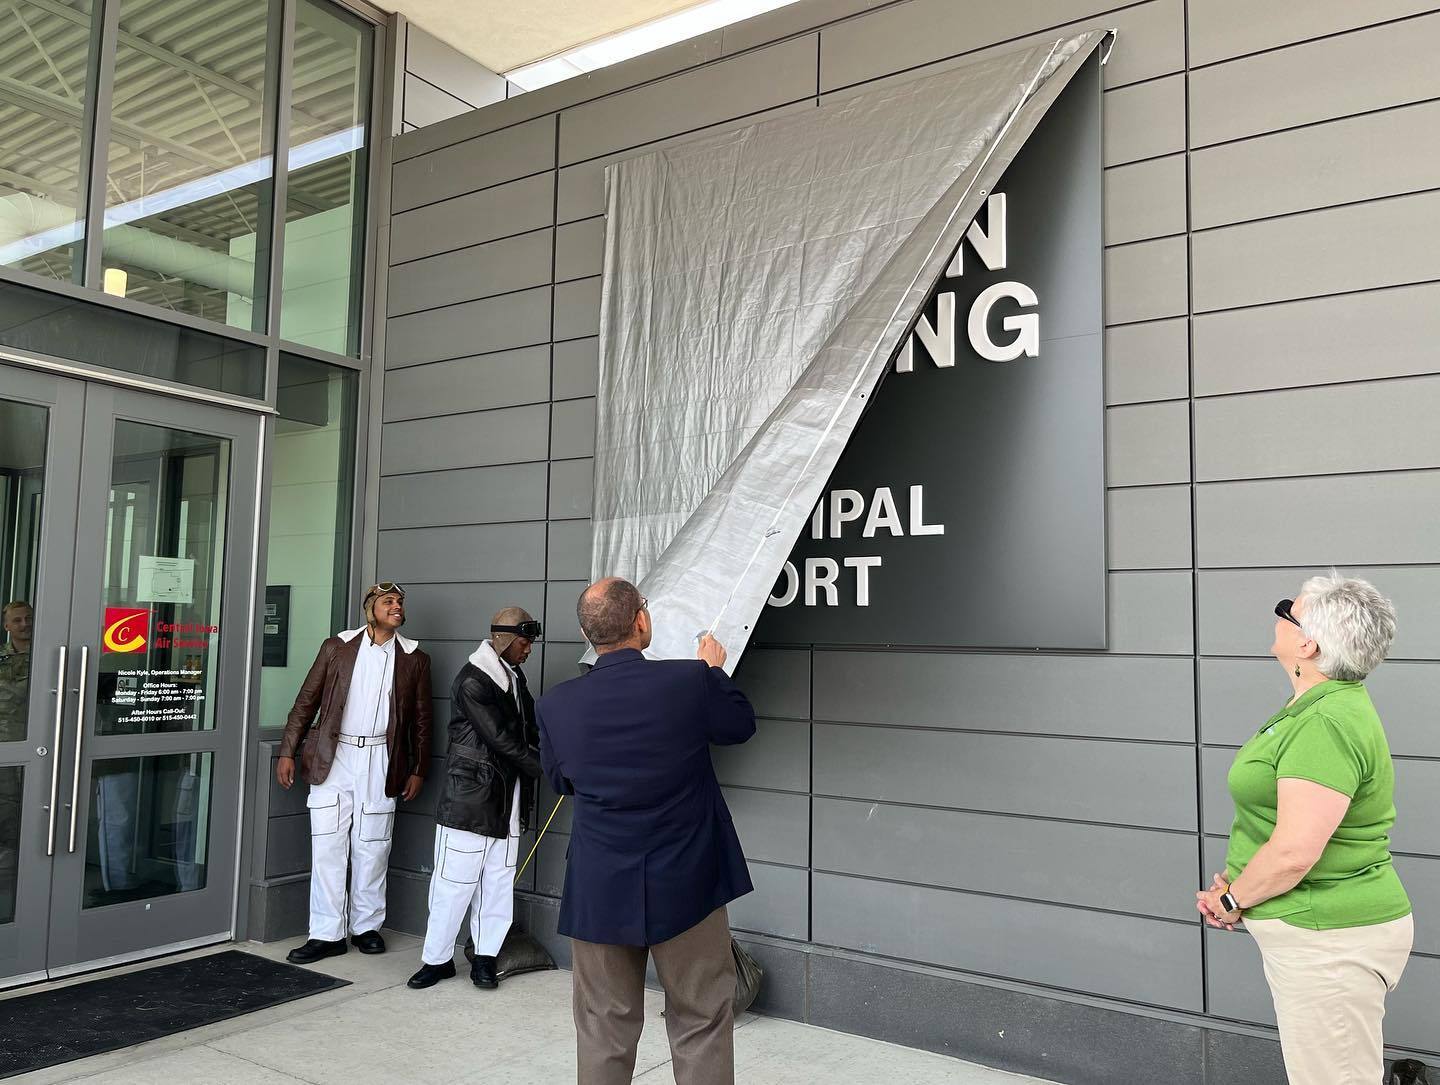 Man removes cover from airport building sign